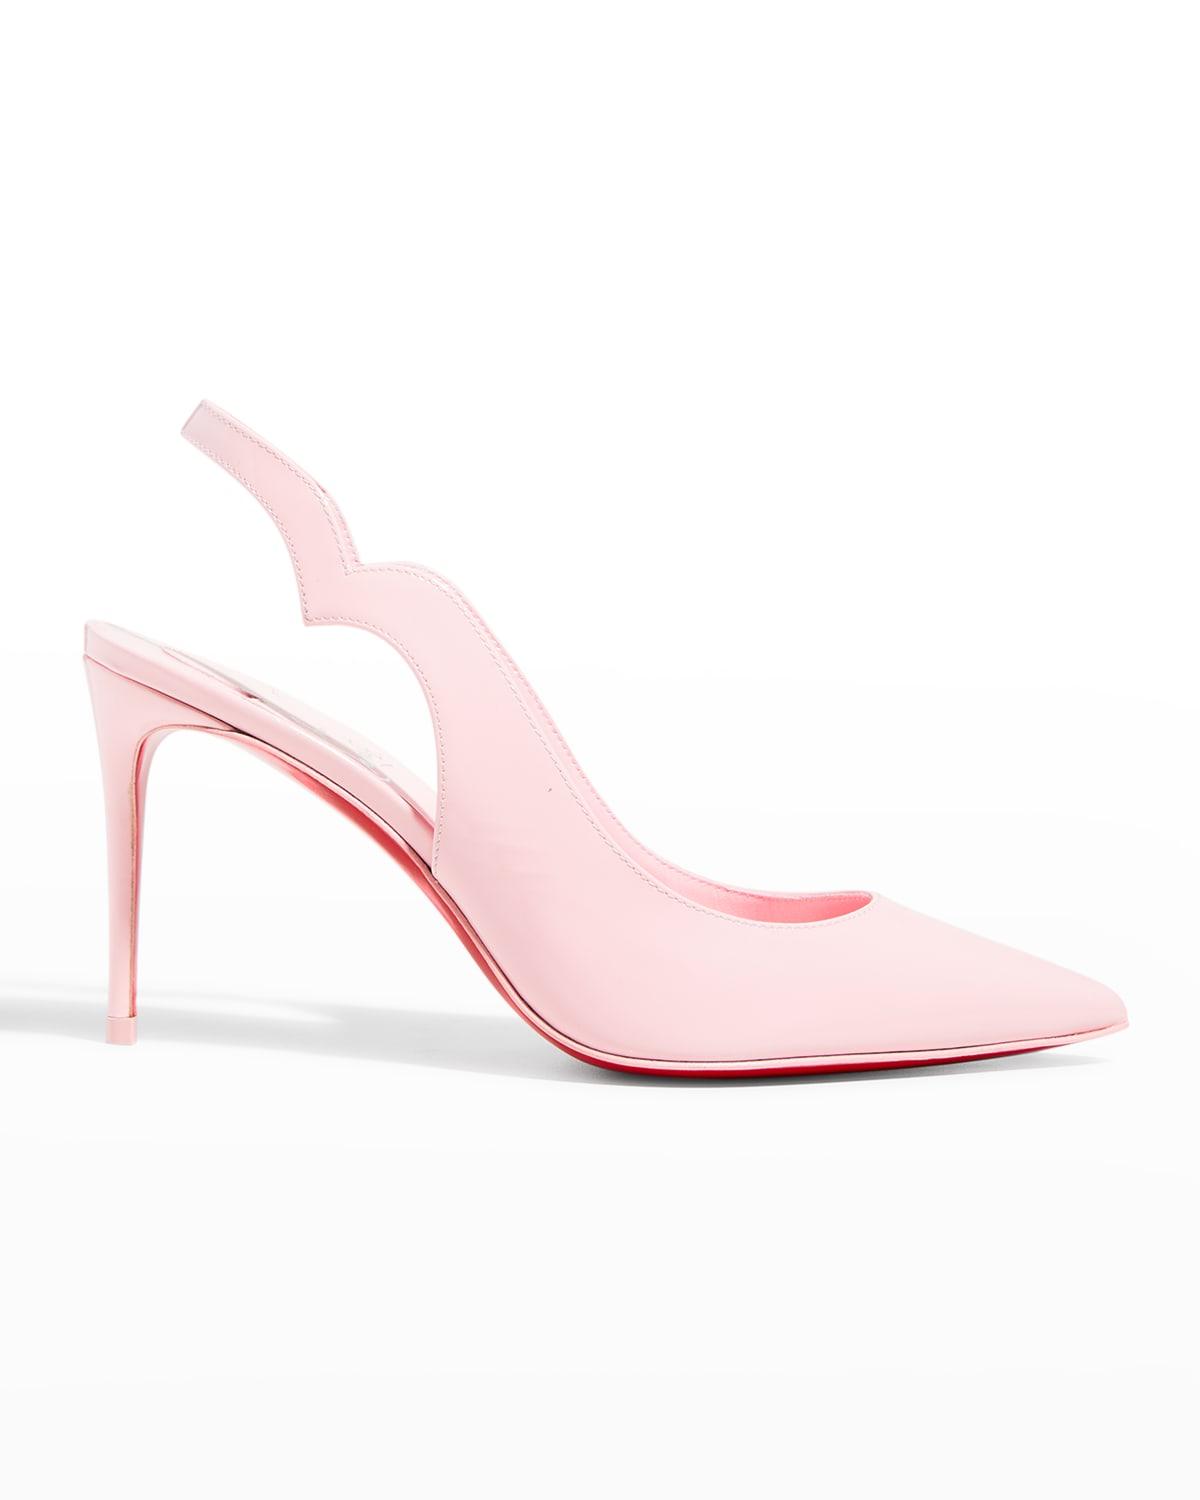 Christian Louboutin Hot Chick Patent Red Sole Slingback Pumps in Pink | Lyst